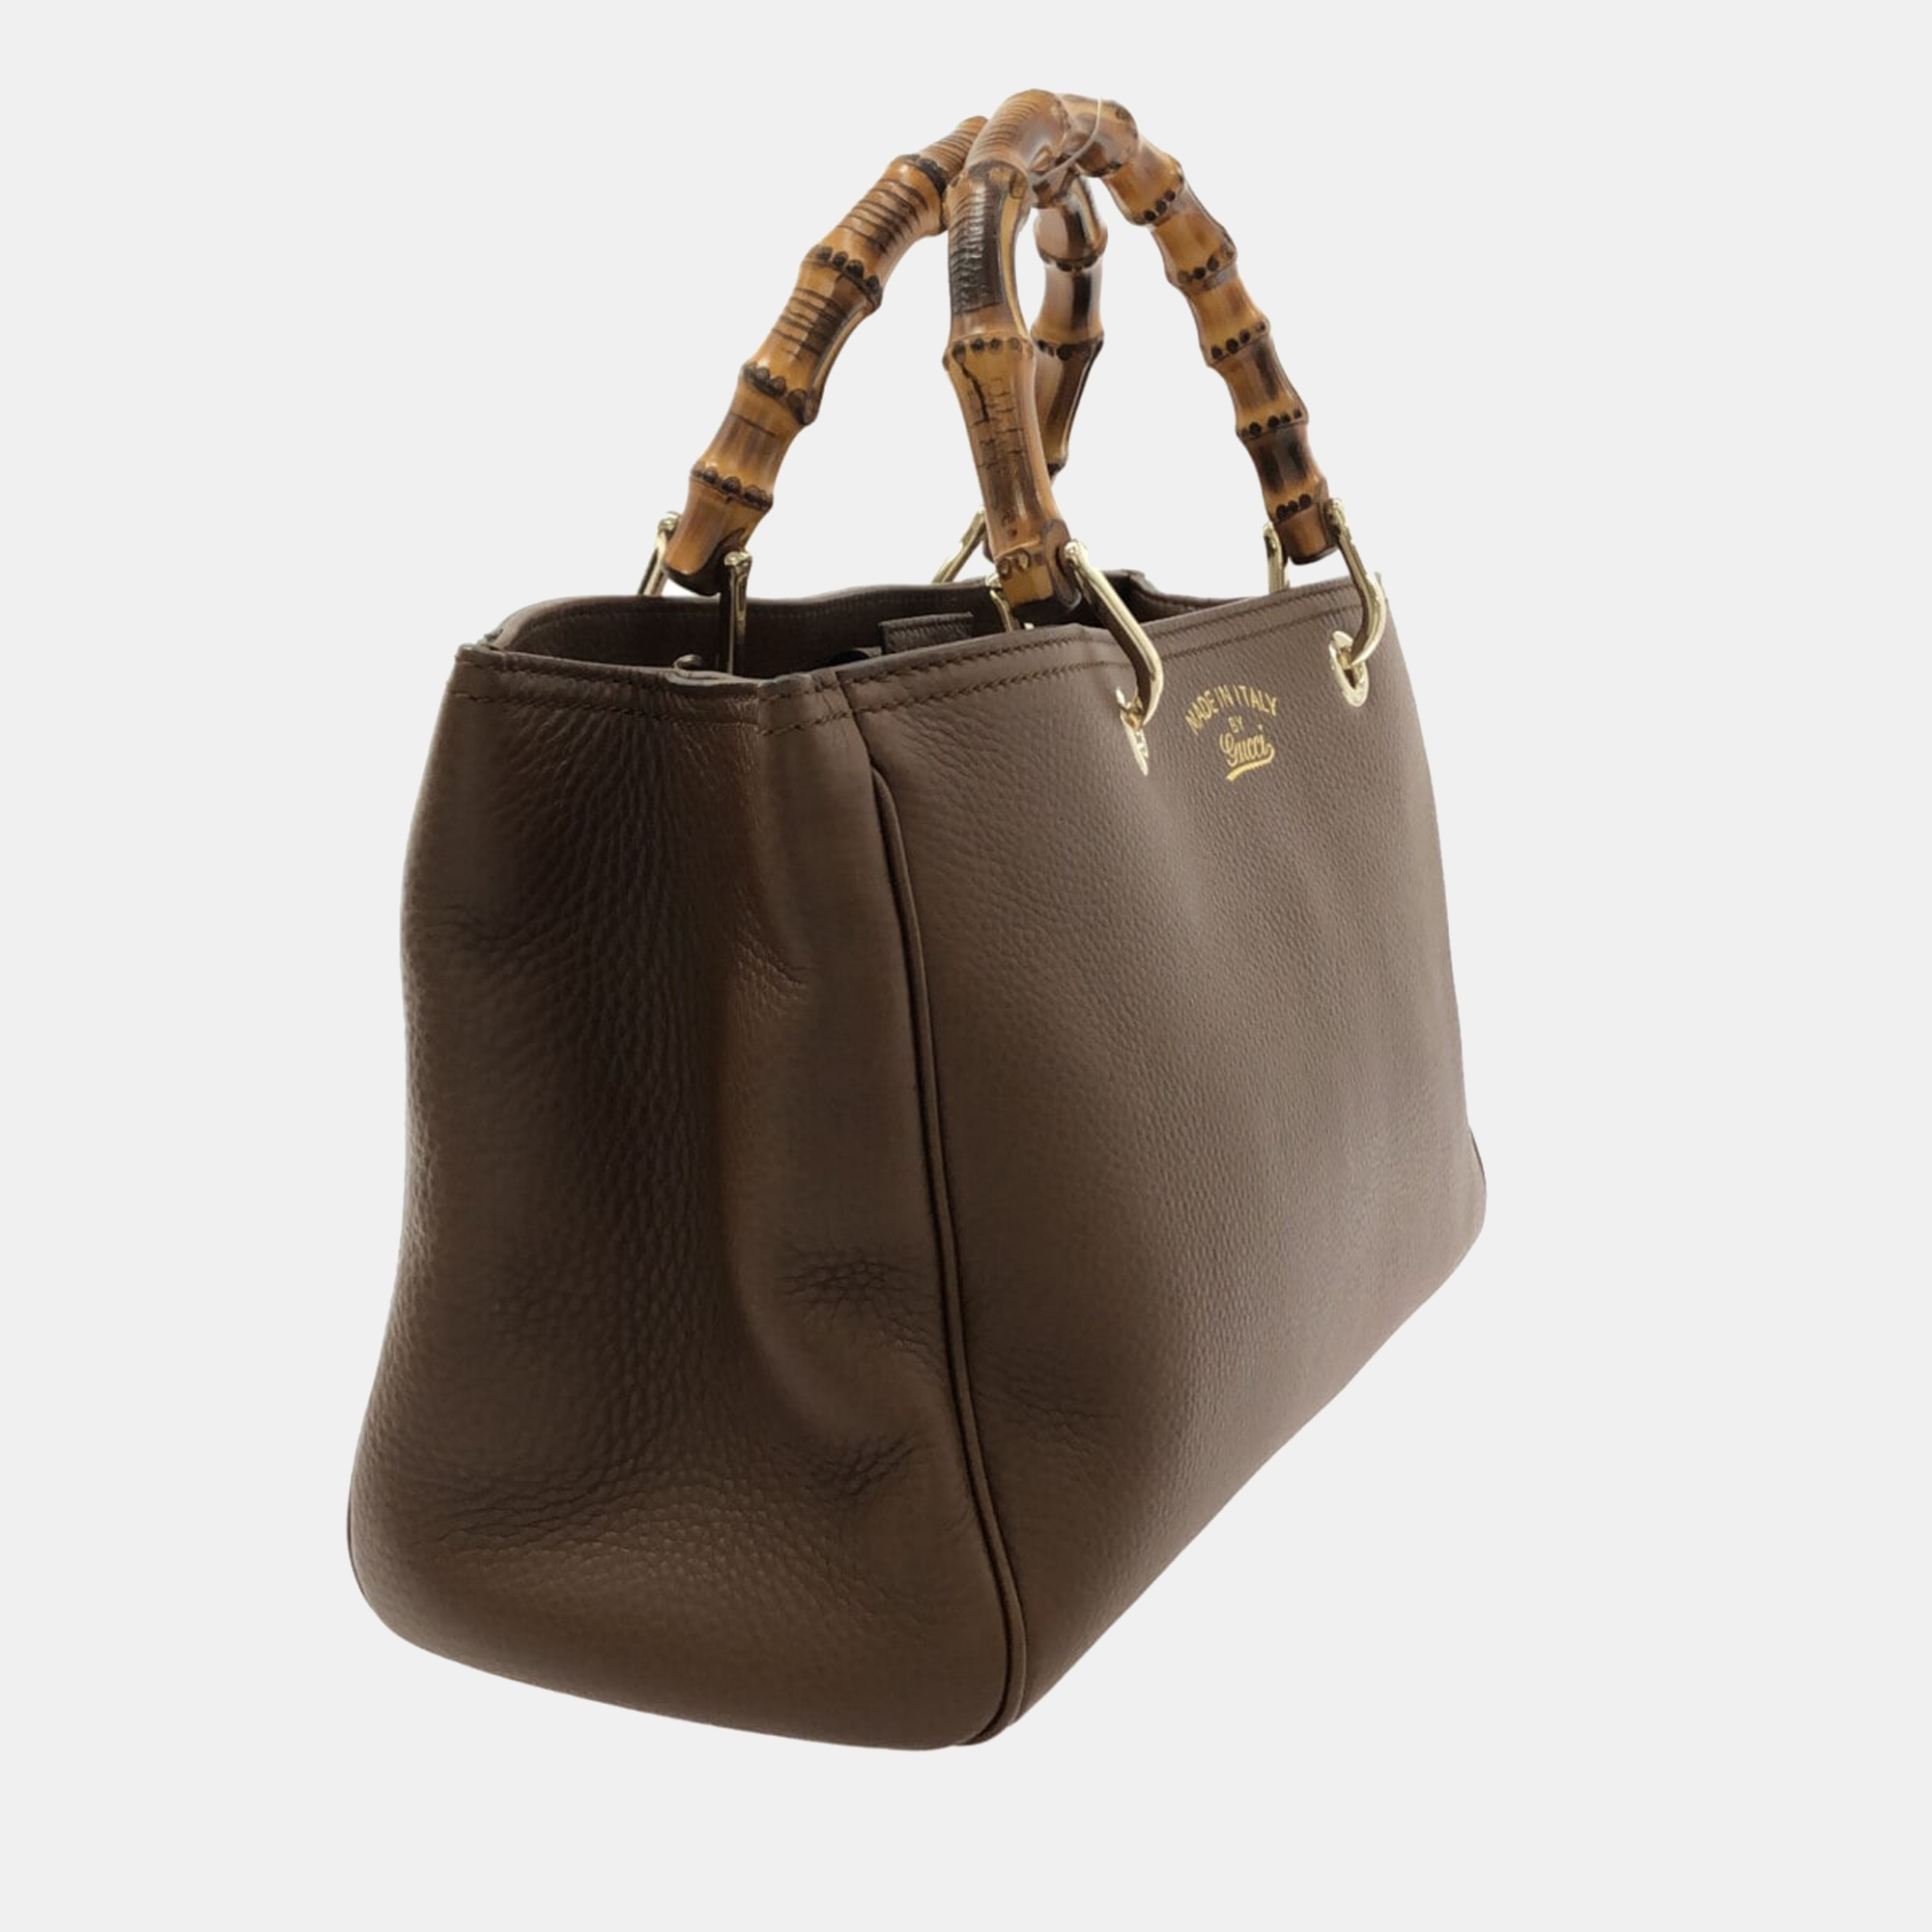 

Gucci Brown Leather Bamboo Shopper Tote Bag